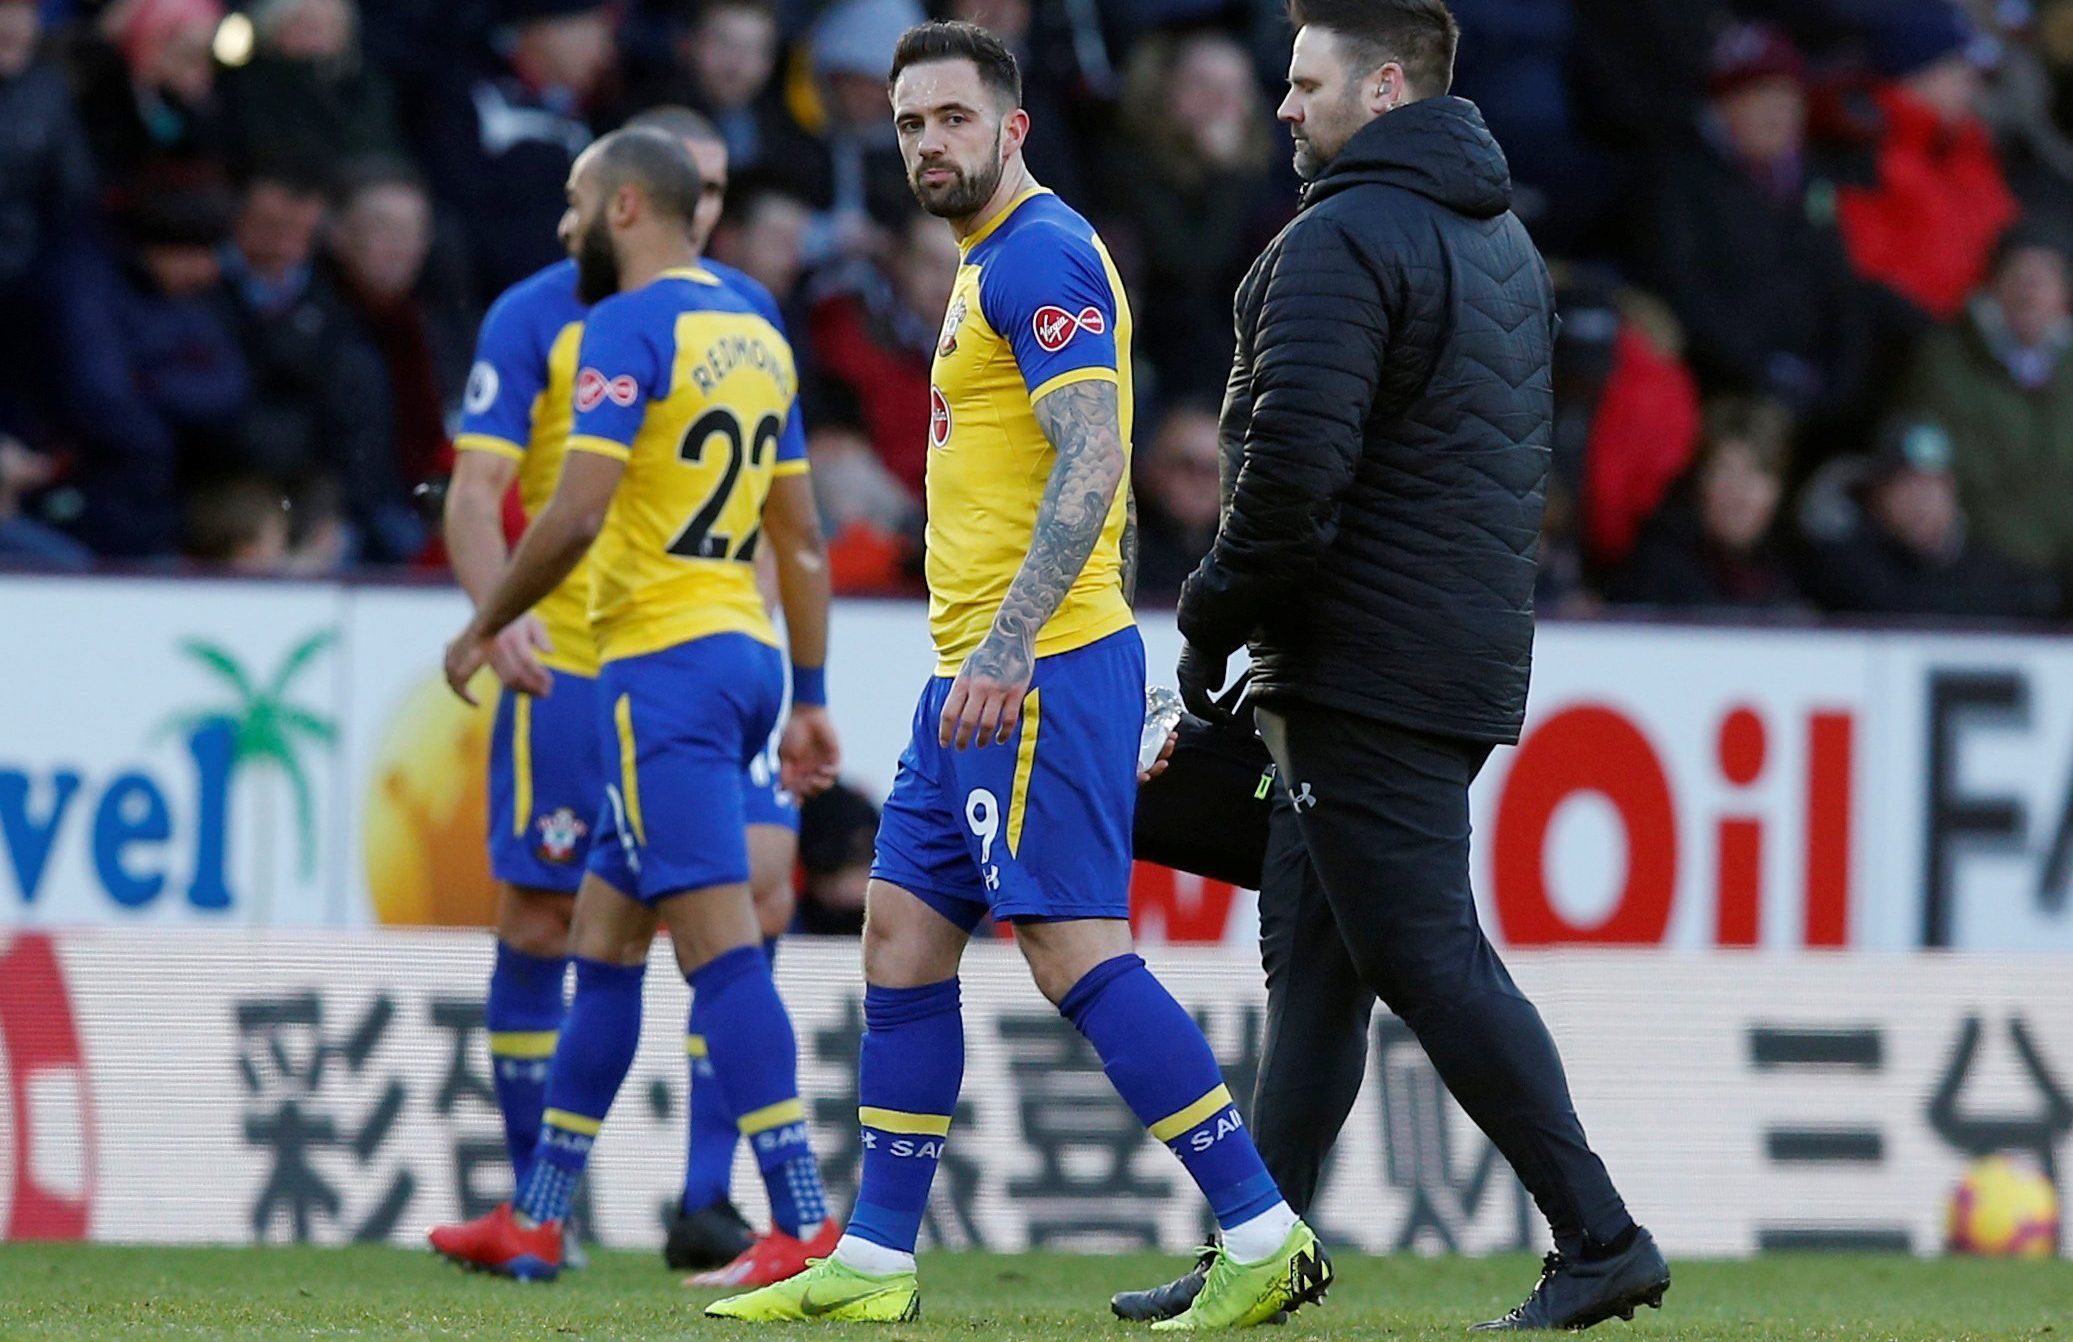 Soccer Football - Premier League - Burnley v Southampton - Turf Moor, Burnley, Britain - February 2, 2019  Southampton's Danny Ings is substituted off after sustaining an injury          REUTERS/Andrew Yates  EDITORIAL USE ONLY. No use with unauthorized audio, video, data, fixture lists, club/league logos or 